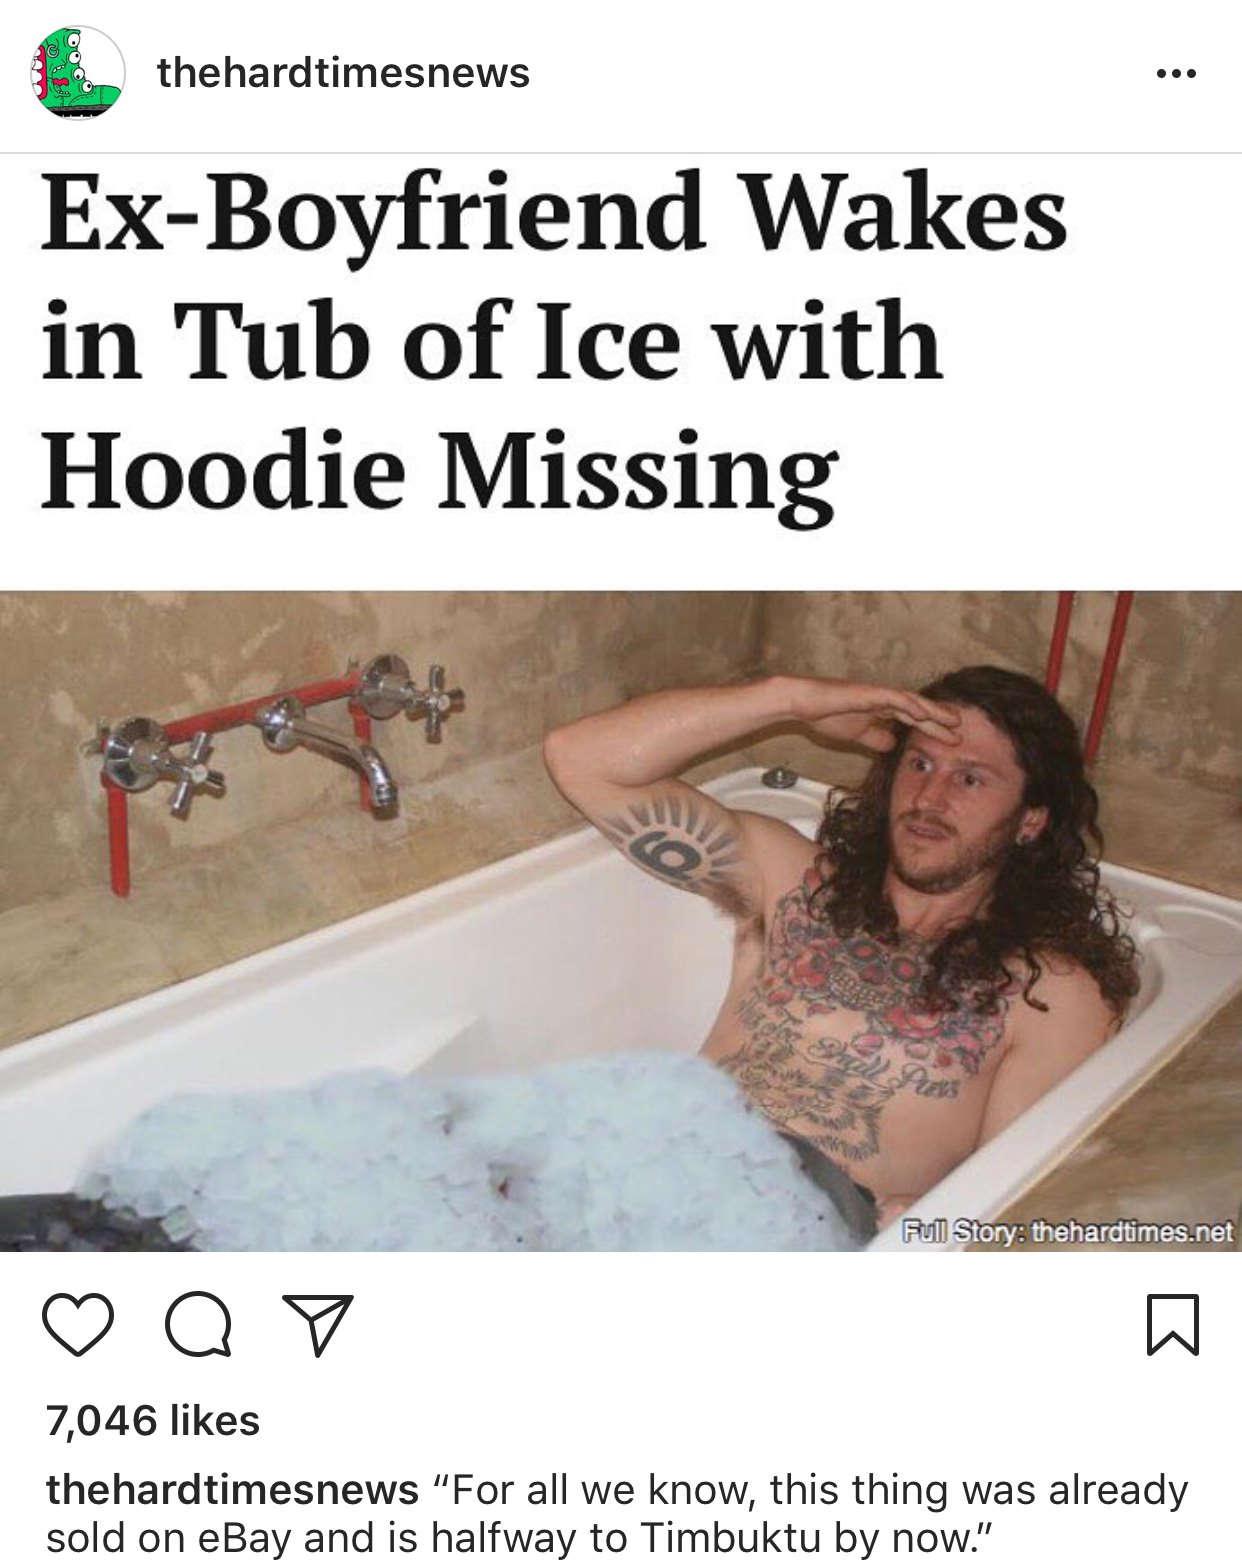 boyfriend hoodies meme - Ooo thehardtimesnews ExBoyfriend Wakes in Tub of Ice with Hoodie Missing Full Story thehardtimes.net Q 7,046 the hardtimesnews "For all we know, this thing was already sold on eBay and is halfway to Timbuktu by now."